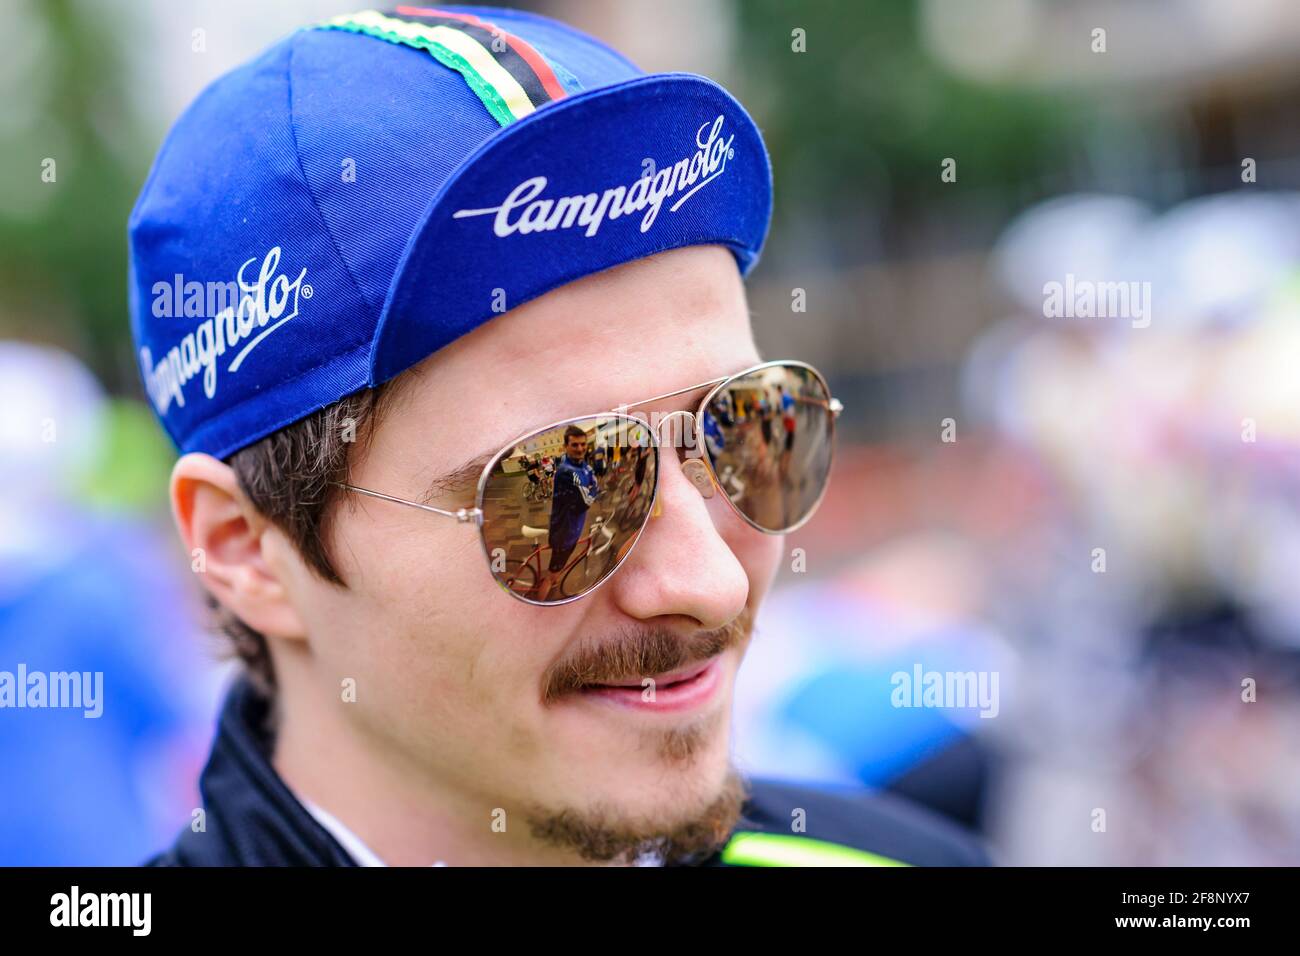 niedersulz, austria, 12 june 2016, competitor with campagnolo cap at the  vintage bicycle event in velo veritas Stock Photo - Alamy